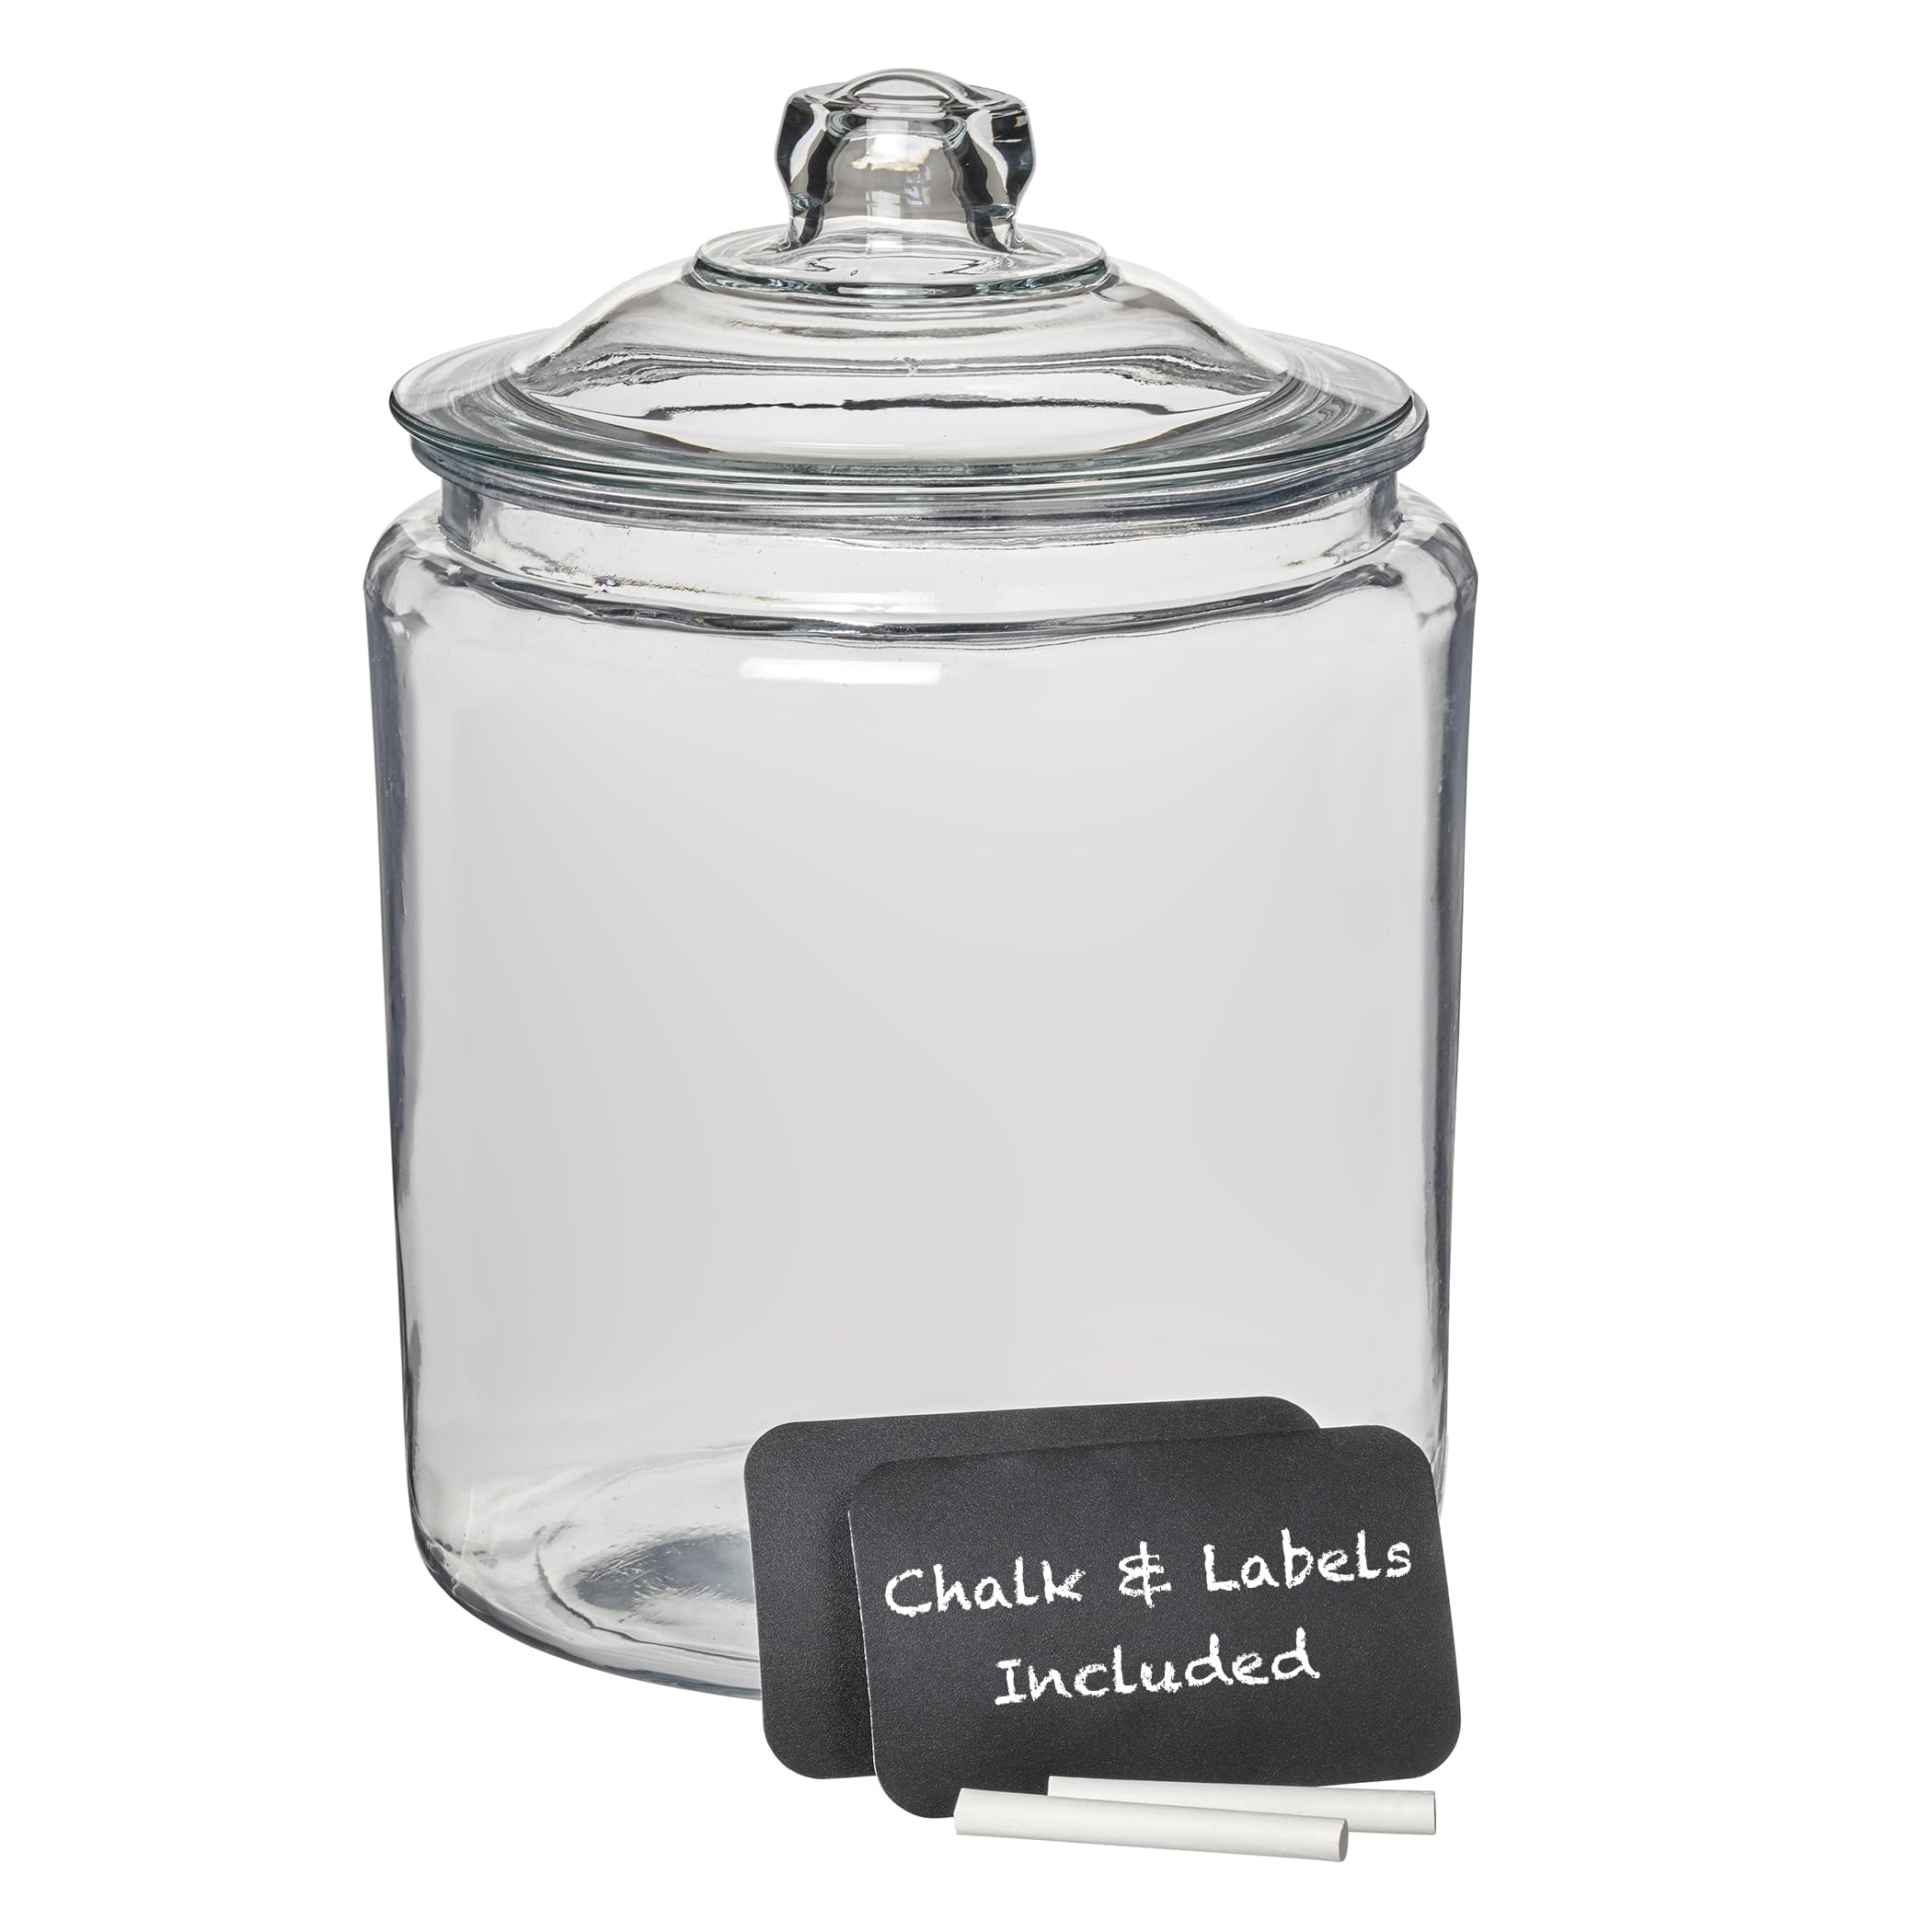 Anchor Hocking Heritage Hill Lid and 2 Chalkboard Labels Glass Jar, 2 Gallon, Set of 1, Clear